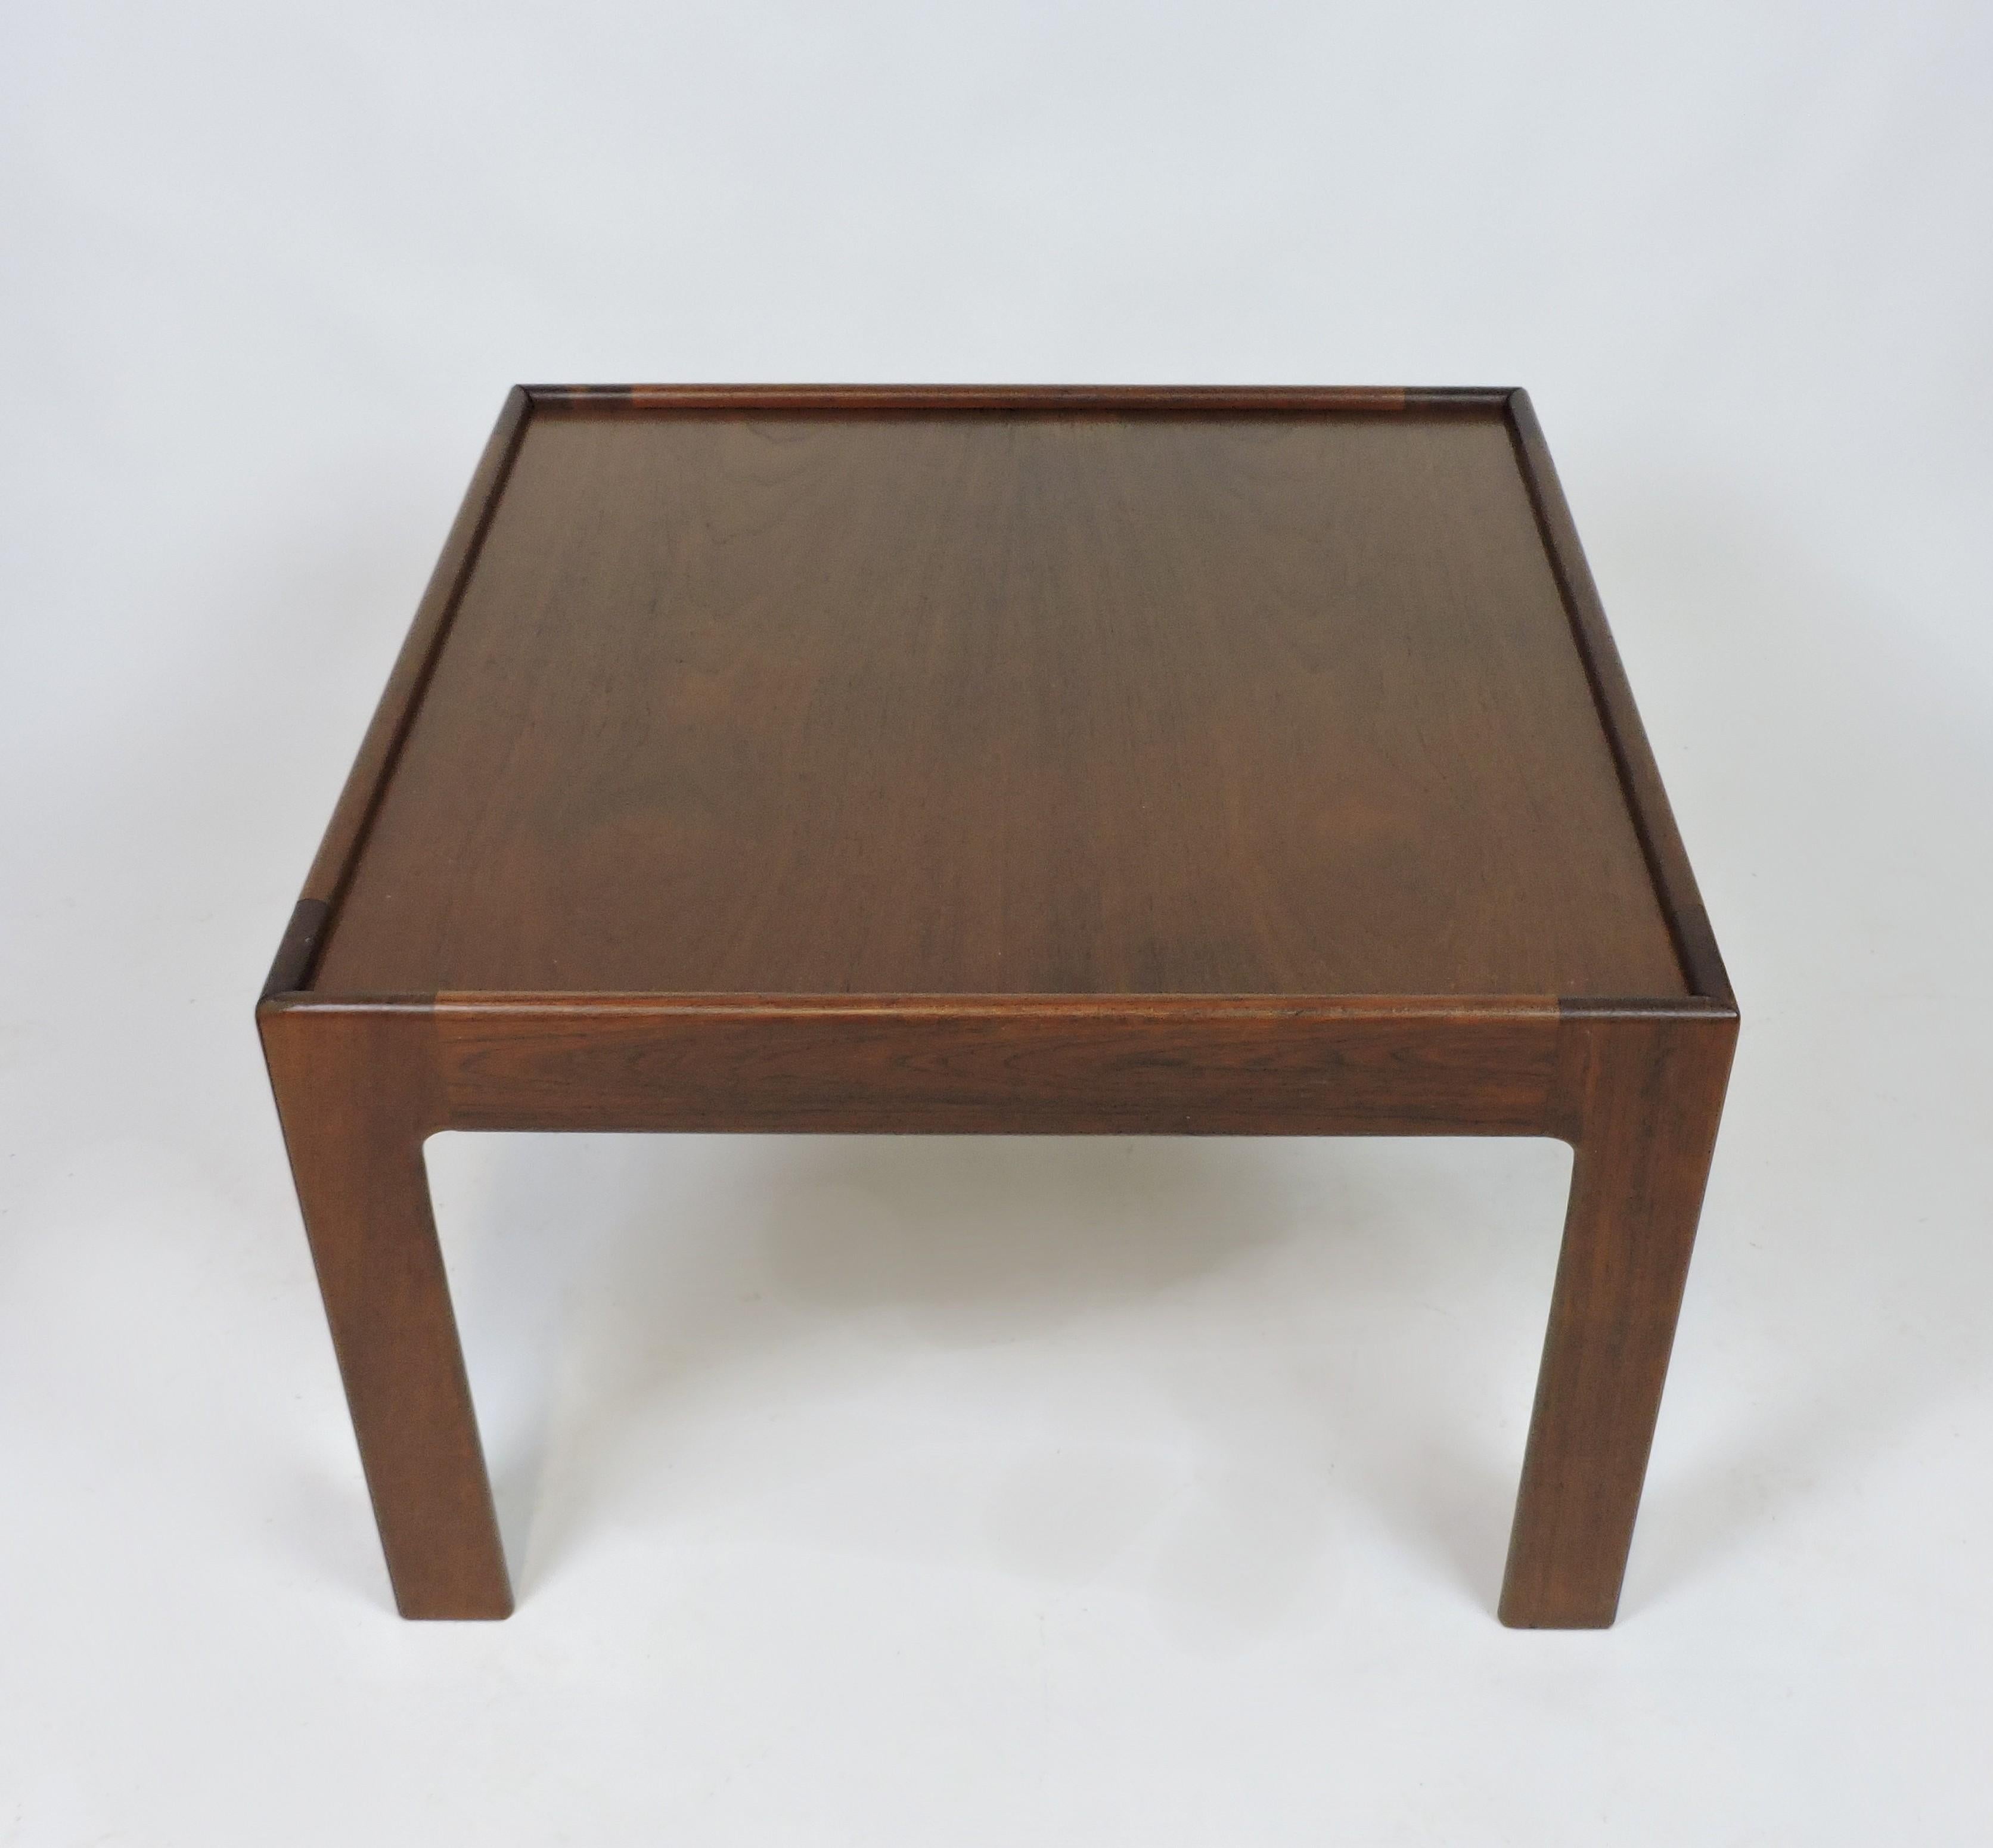 Illum Wikkelso Danish Modern Teak End Table by Neils Eilersen In Good Condition For Sale In Chesterfield, NJ